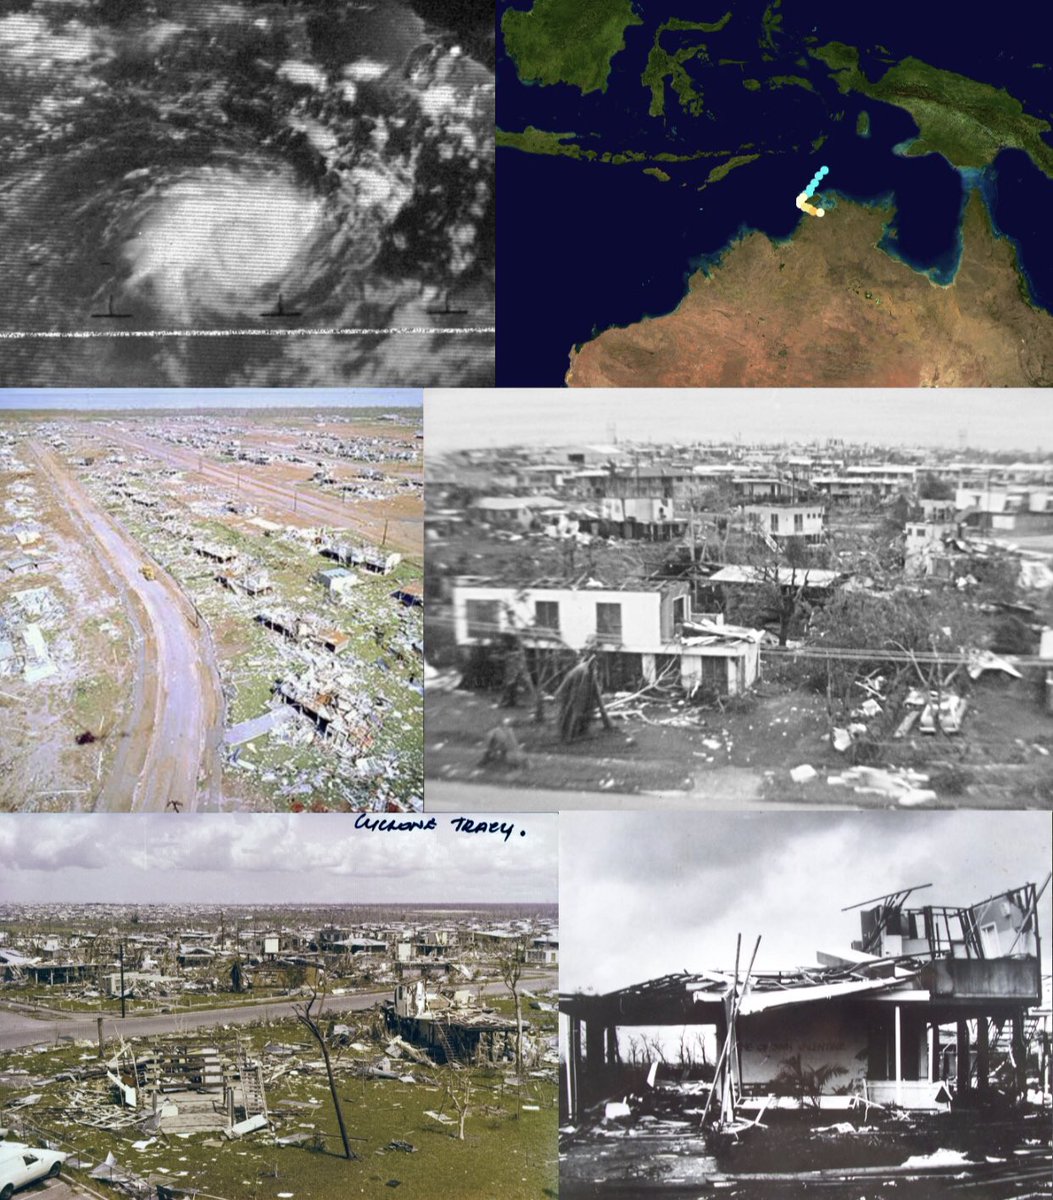 On Christmas Eve 1974, Darwin Australia has come face-to-face with #CycloneTracy, a 125mph Category 3 storm that caused catastrophic destruction in the small town. It is the 2nd smallest TC worldwide, only behind Marco in 2008. Over 71 casualties, and $645.35 million in damage.